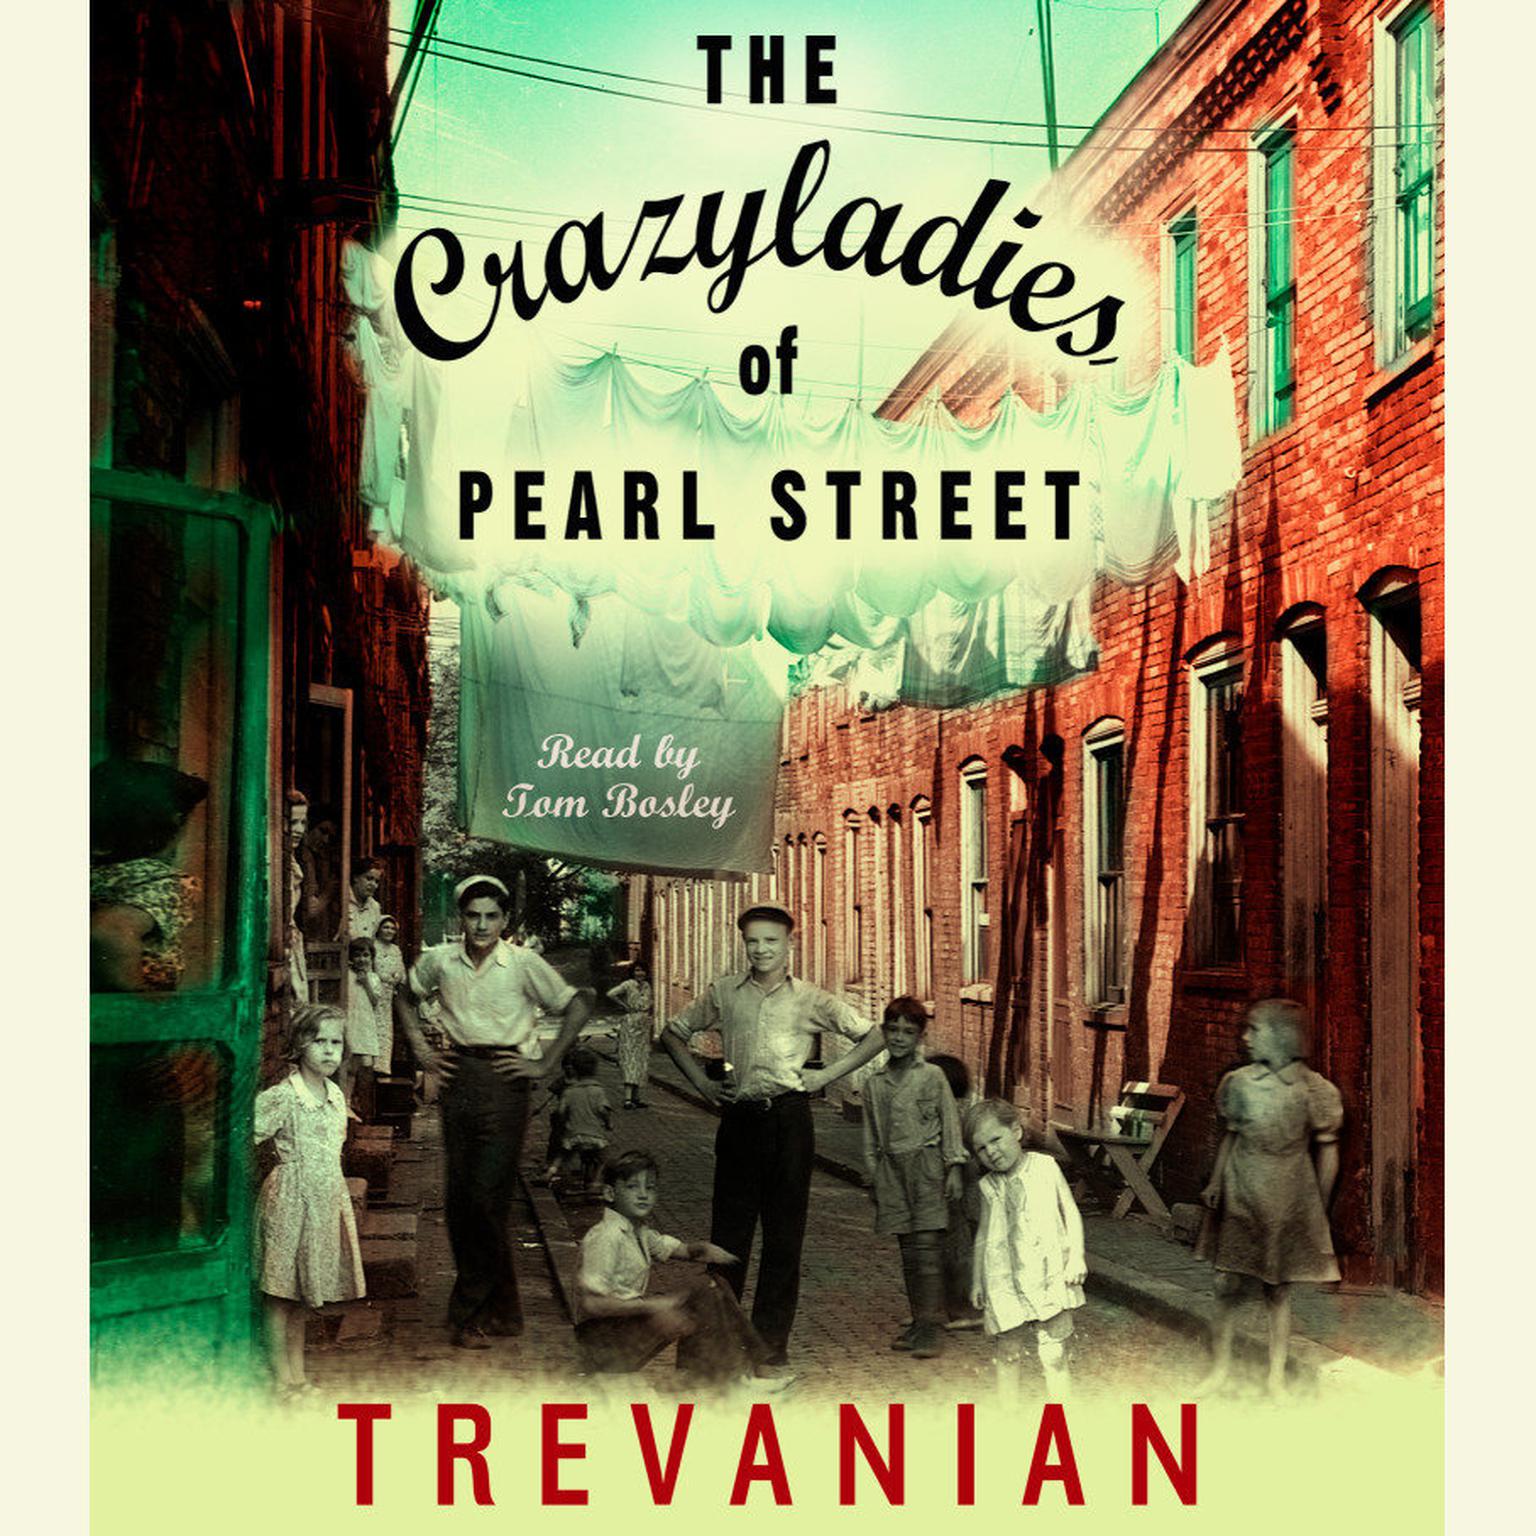 The Crazyladies of Pearl Street (Abridged): A Novel Audiobook, by Trevanian